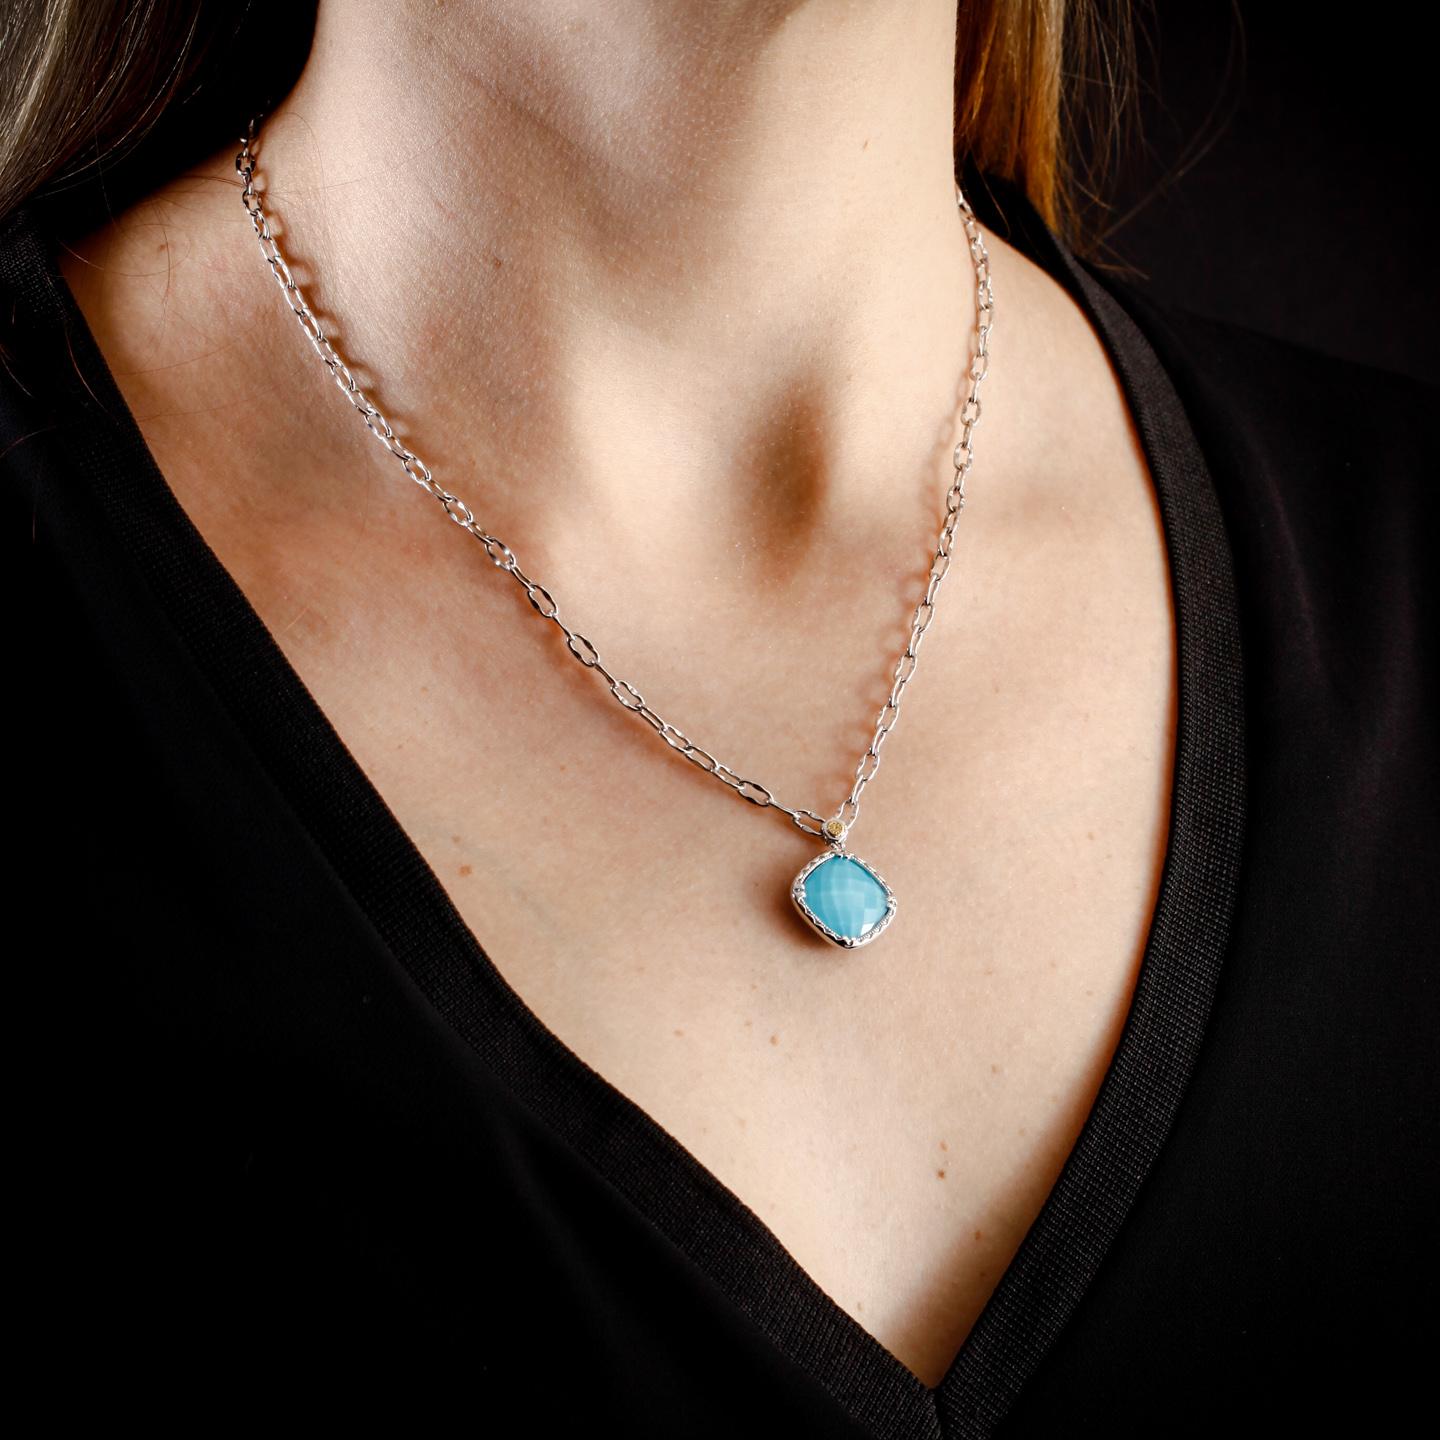 This Tacori Silver necklace is set with a 7.00 ct. cushion-shaped pendant of turquoise and clear quartz surrounded by silver. The Tacori stamp featured on the bale is 18k yellow gold. The silver Tacori chain is 18 inches long. This necklace is in